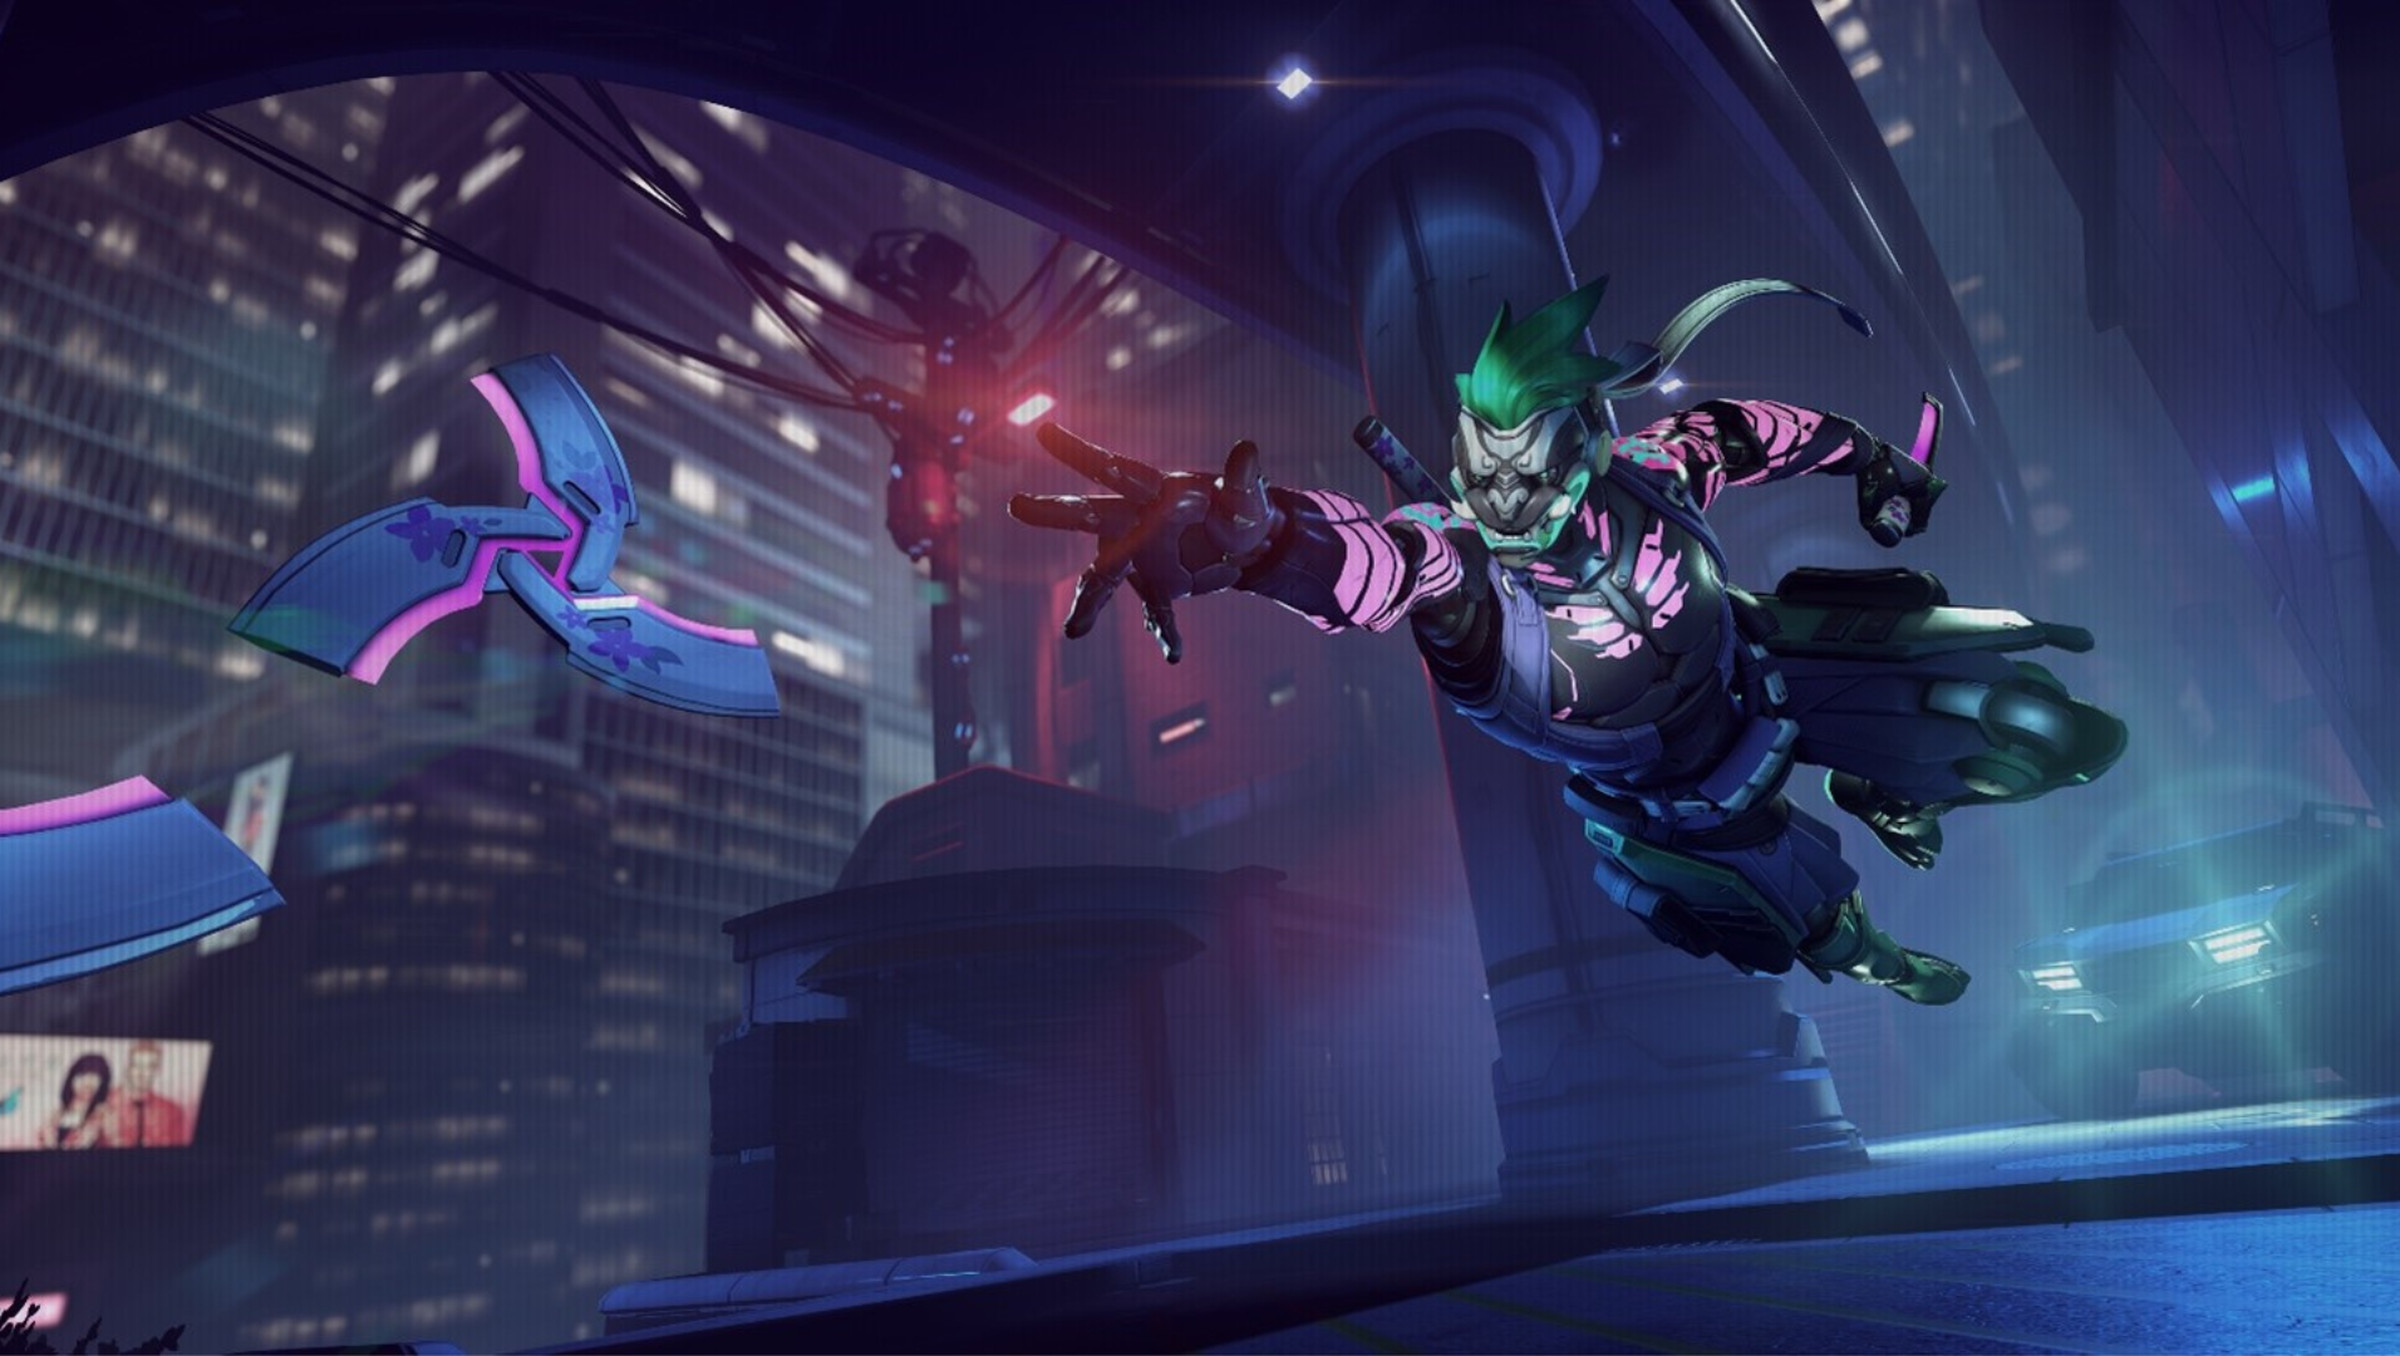 Promotional image from Overwatch 2 featuring ninja hero Genji lunging forward flinging ninja stars clad in a cyberpunk-inspired ninja outfit complete with futuristic demon mask